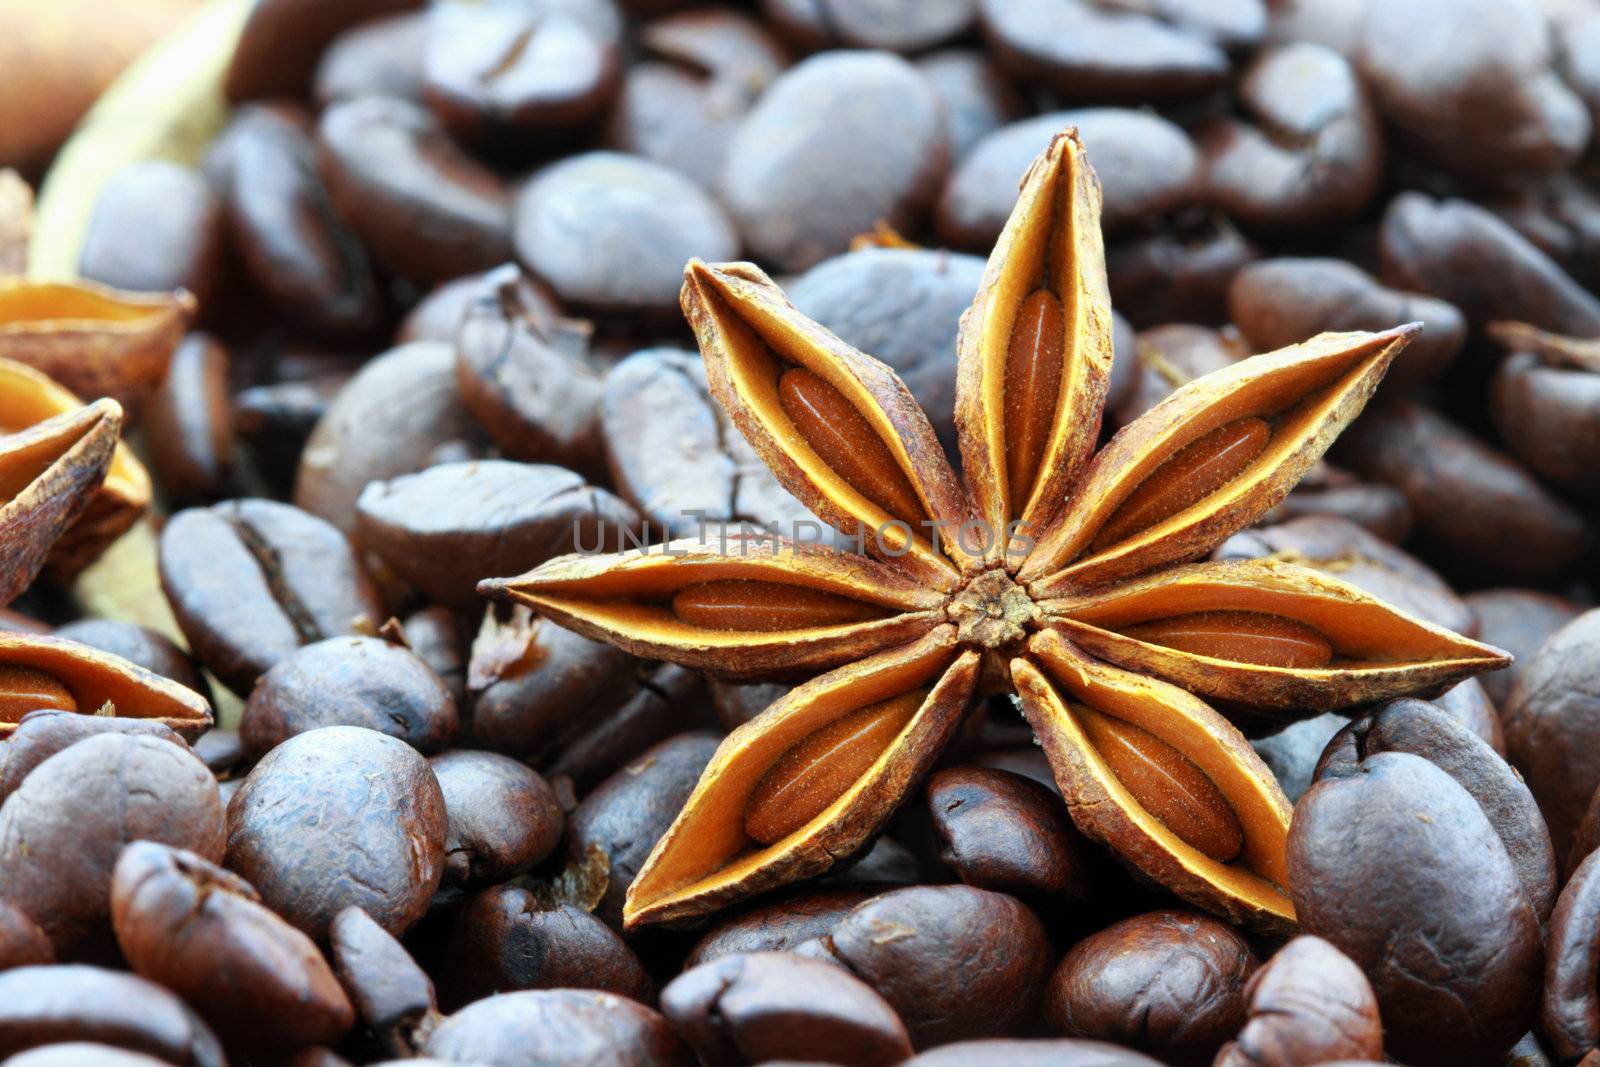 Anise Star and Coffee Beans by StephanieFrey